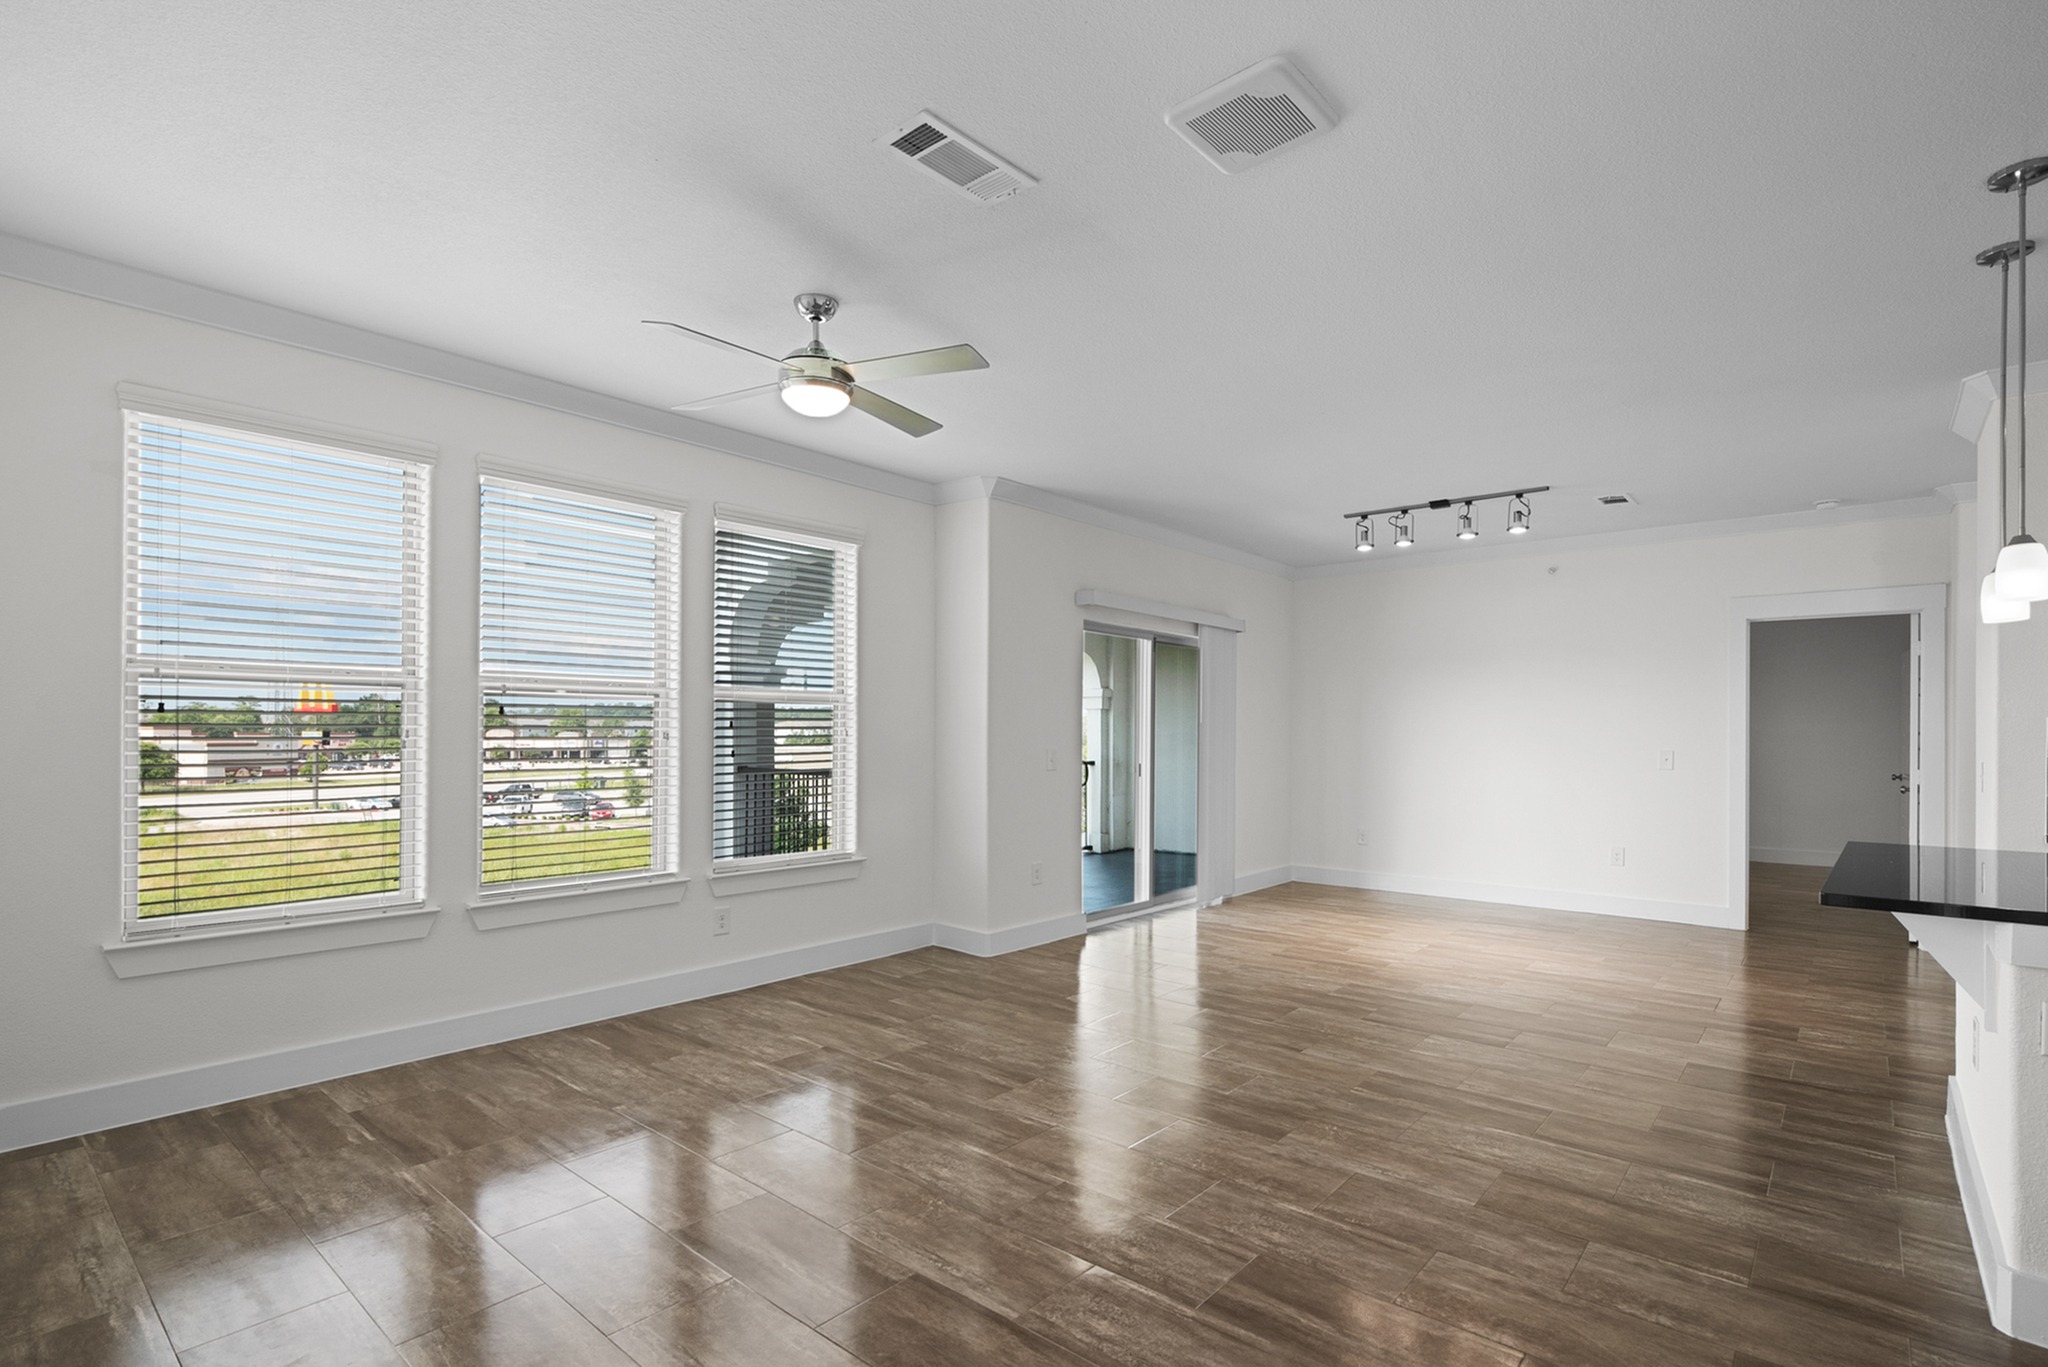 Floor Plan 6 Spacious Layout | Conroe Apartments | The Towers Woodland